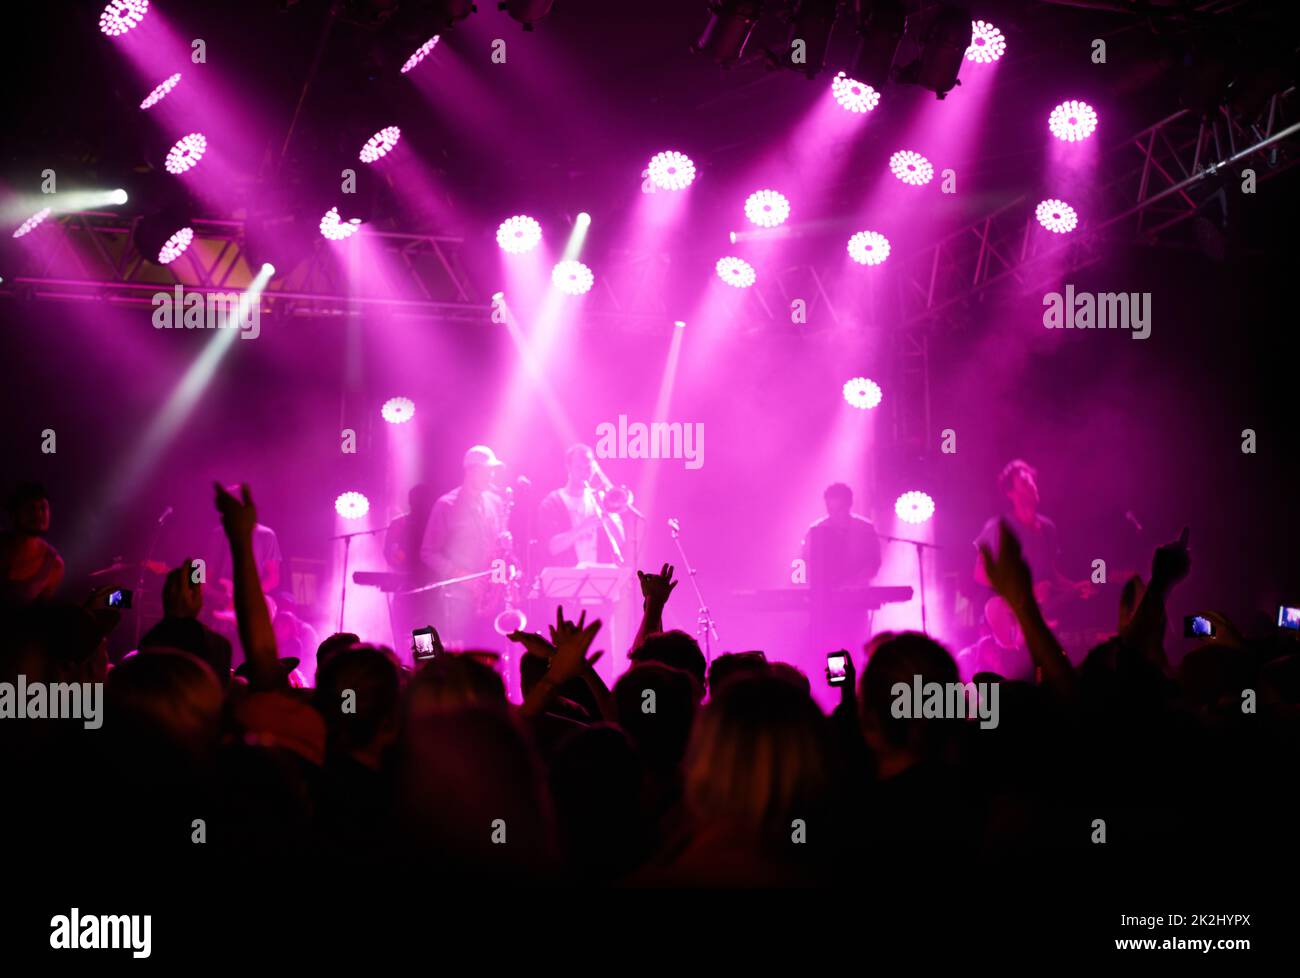 Sensational supporters. Rearview of an audience with hands raised at a music festival and lights streaming down from above the stage. Stock Photo